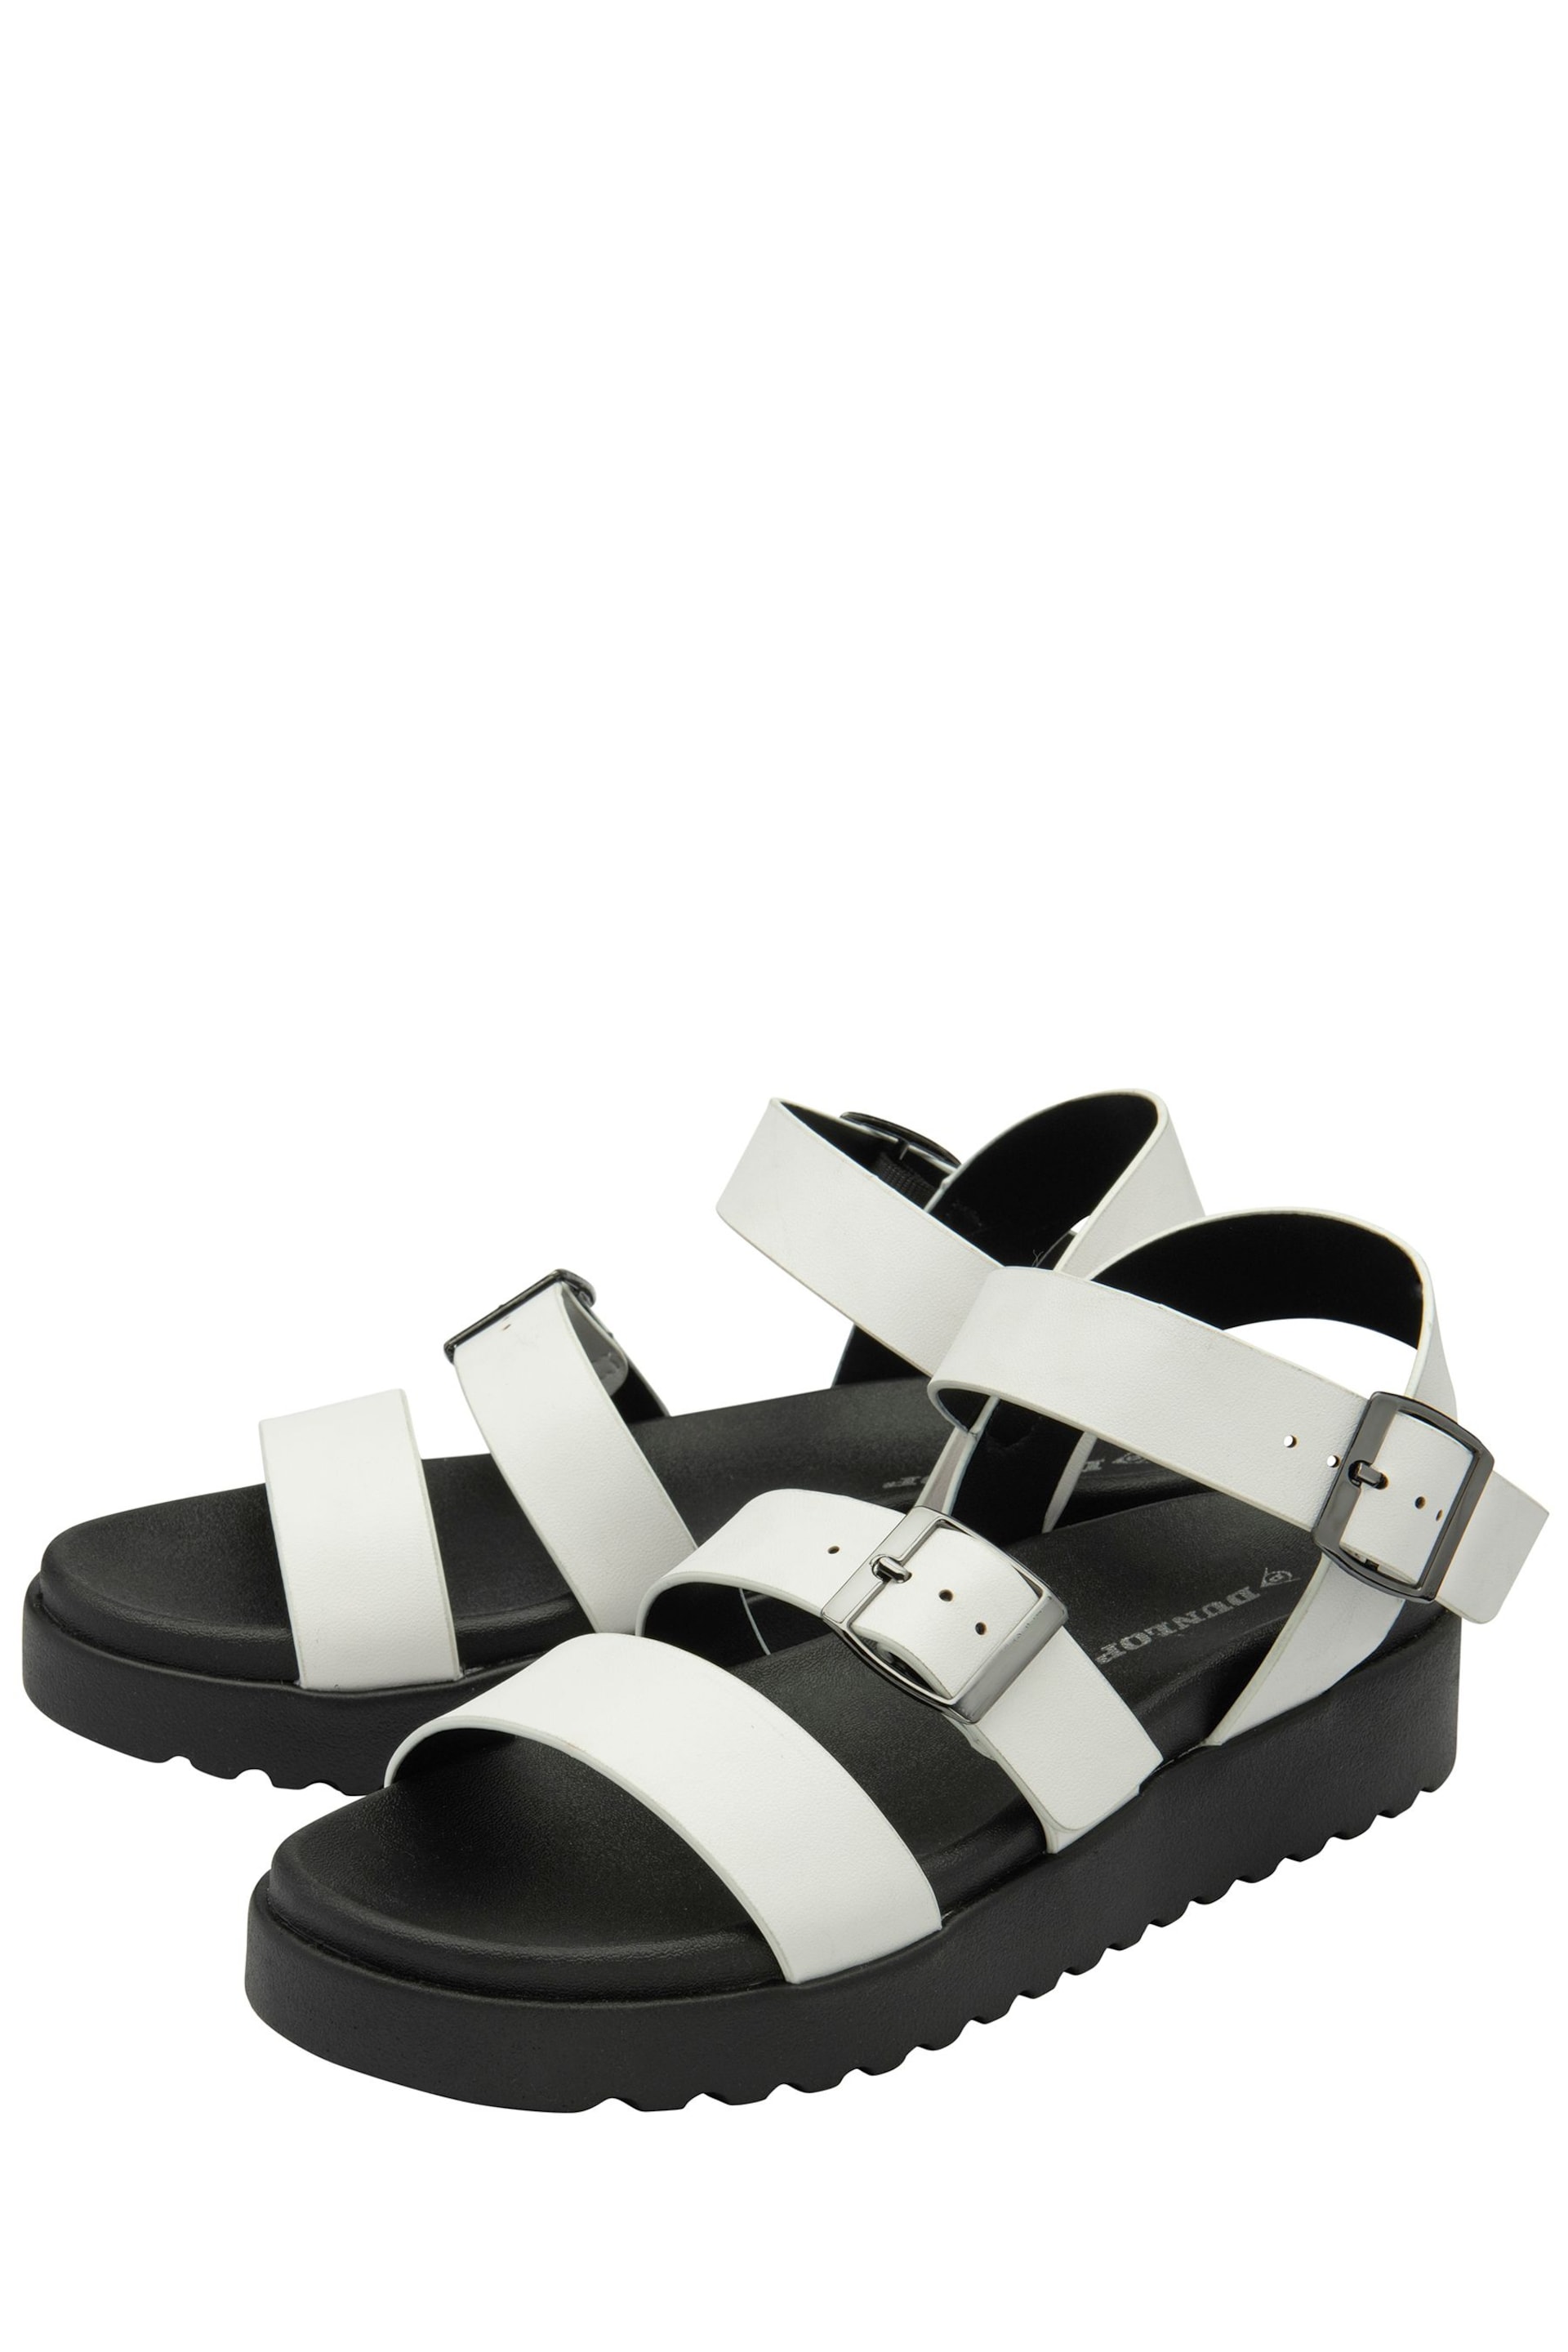 Dunlop White Ladies Toe Post Footbed Sandals - Image 2 of 4